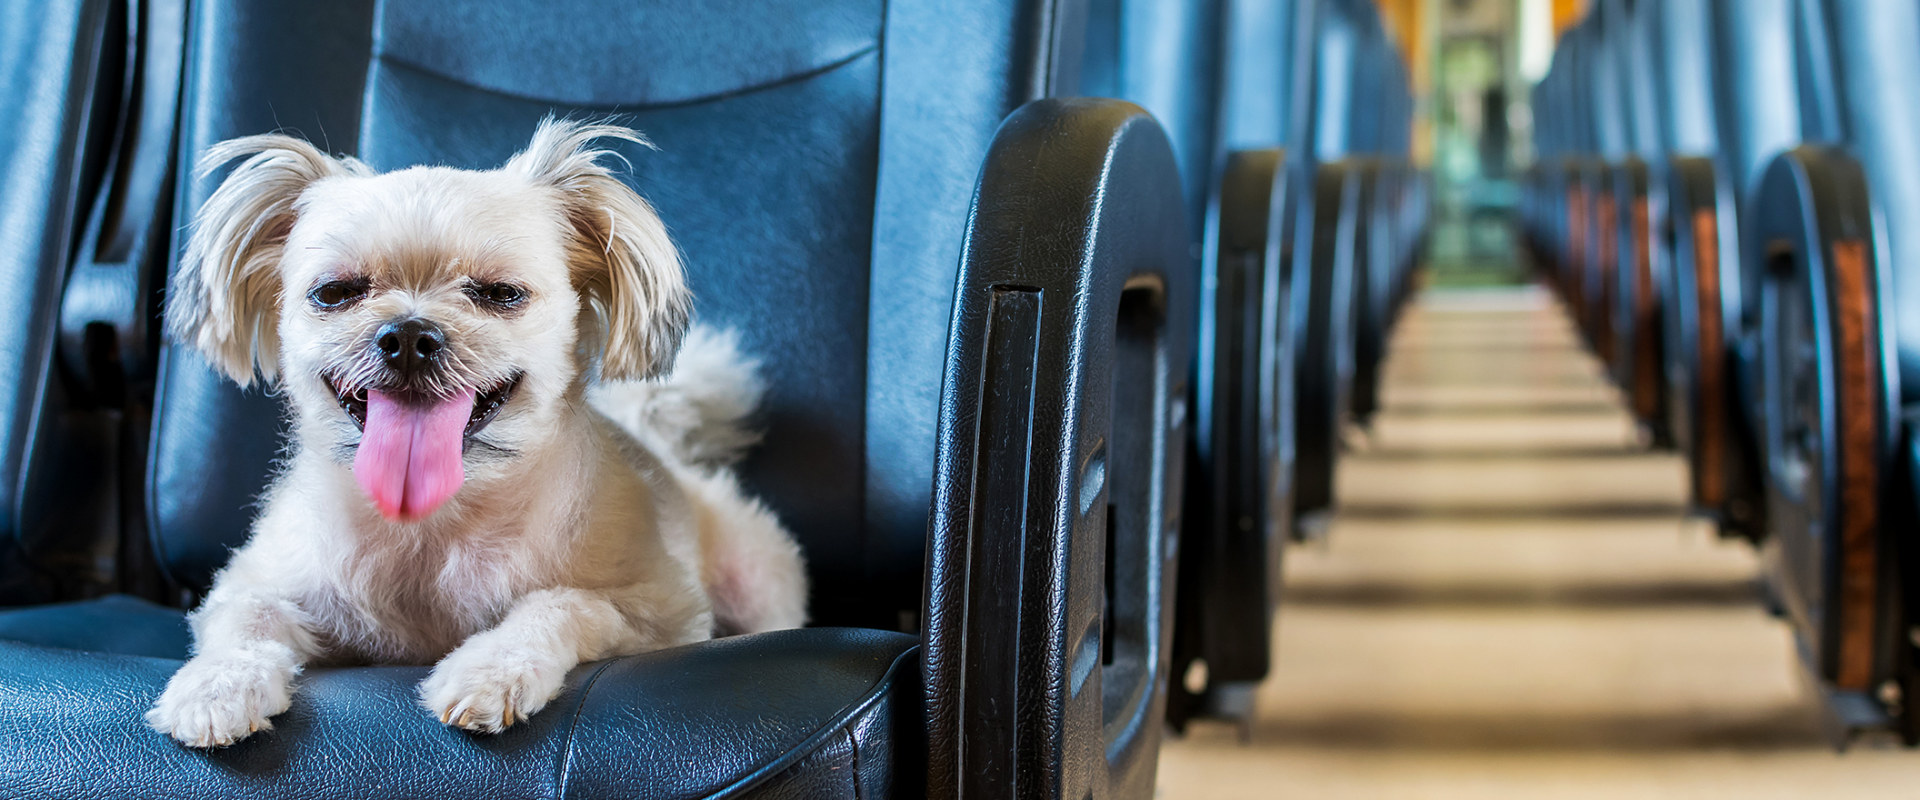 Traveling Internationally with a Dog: What You Need to Know